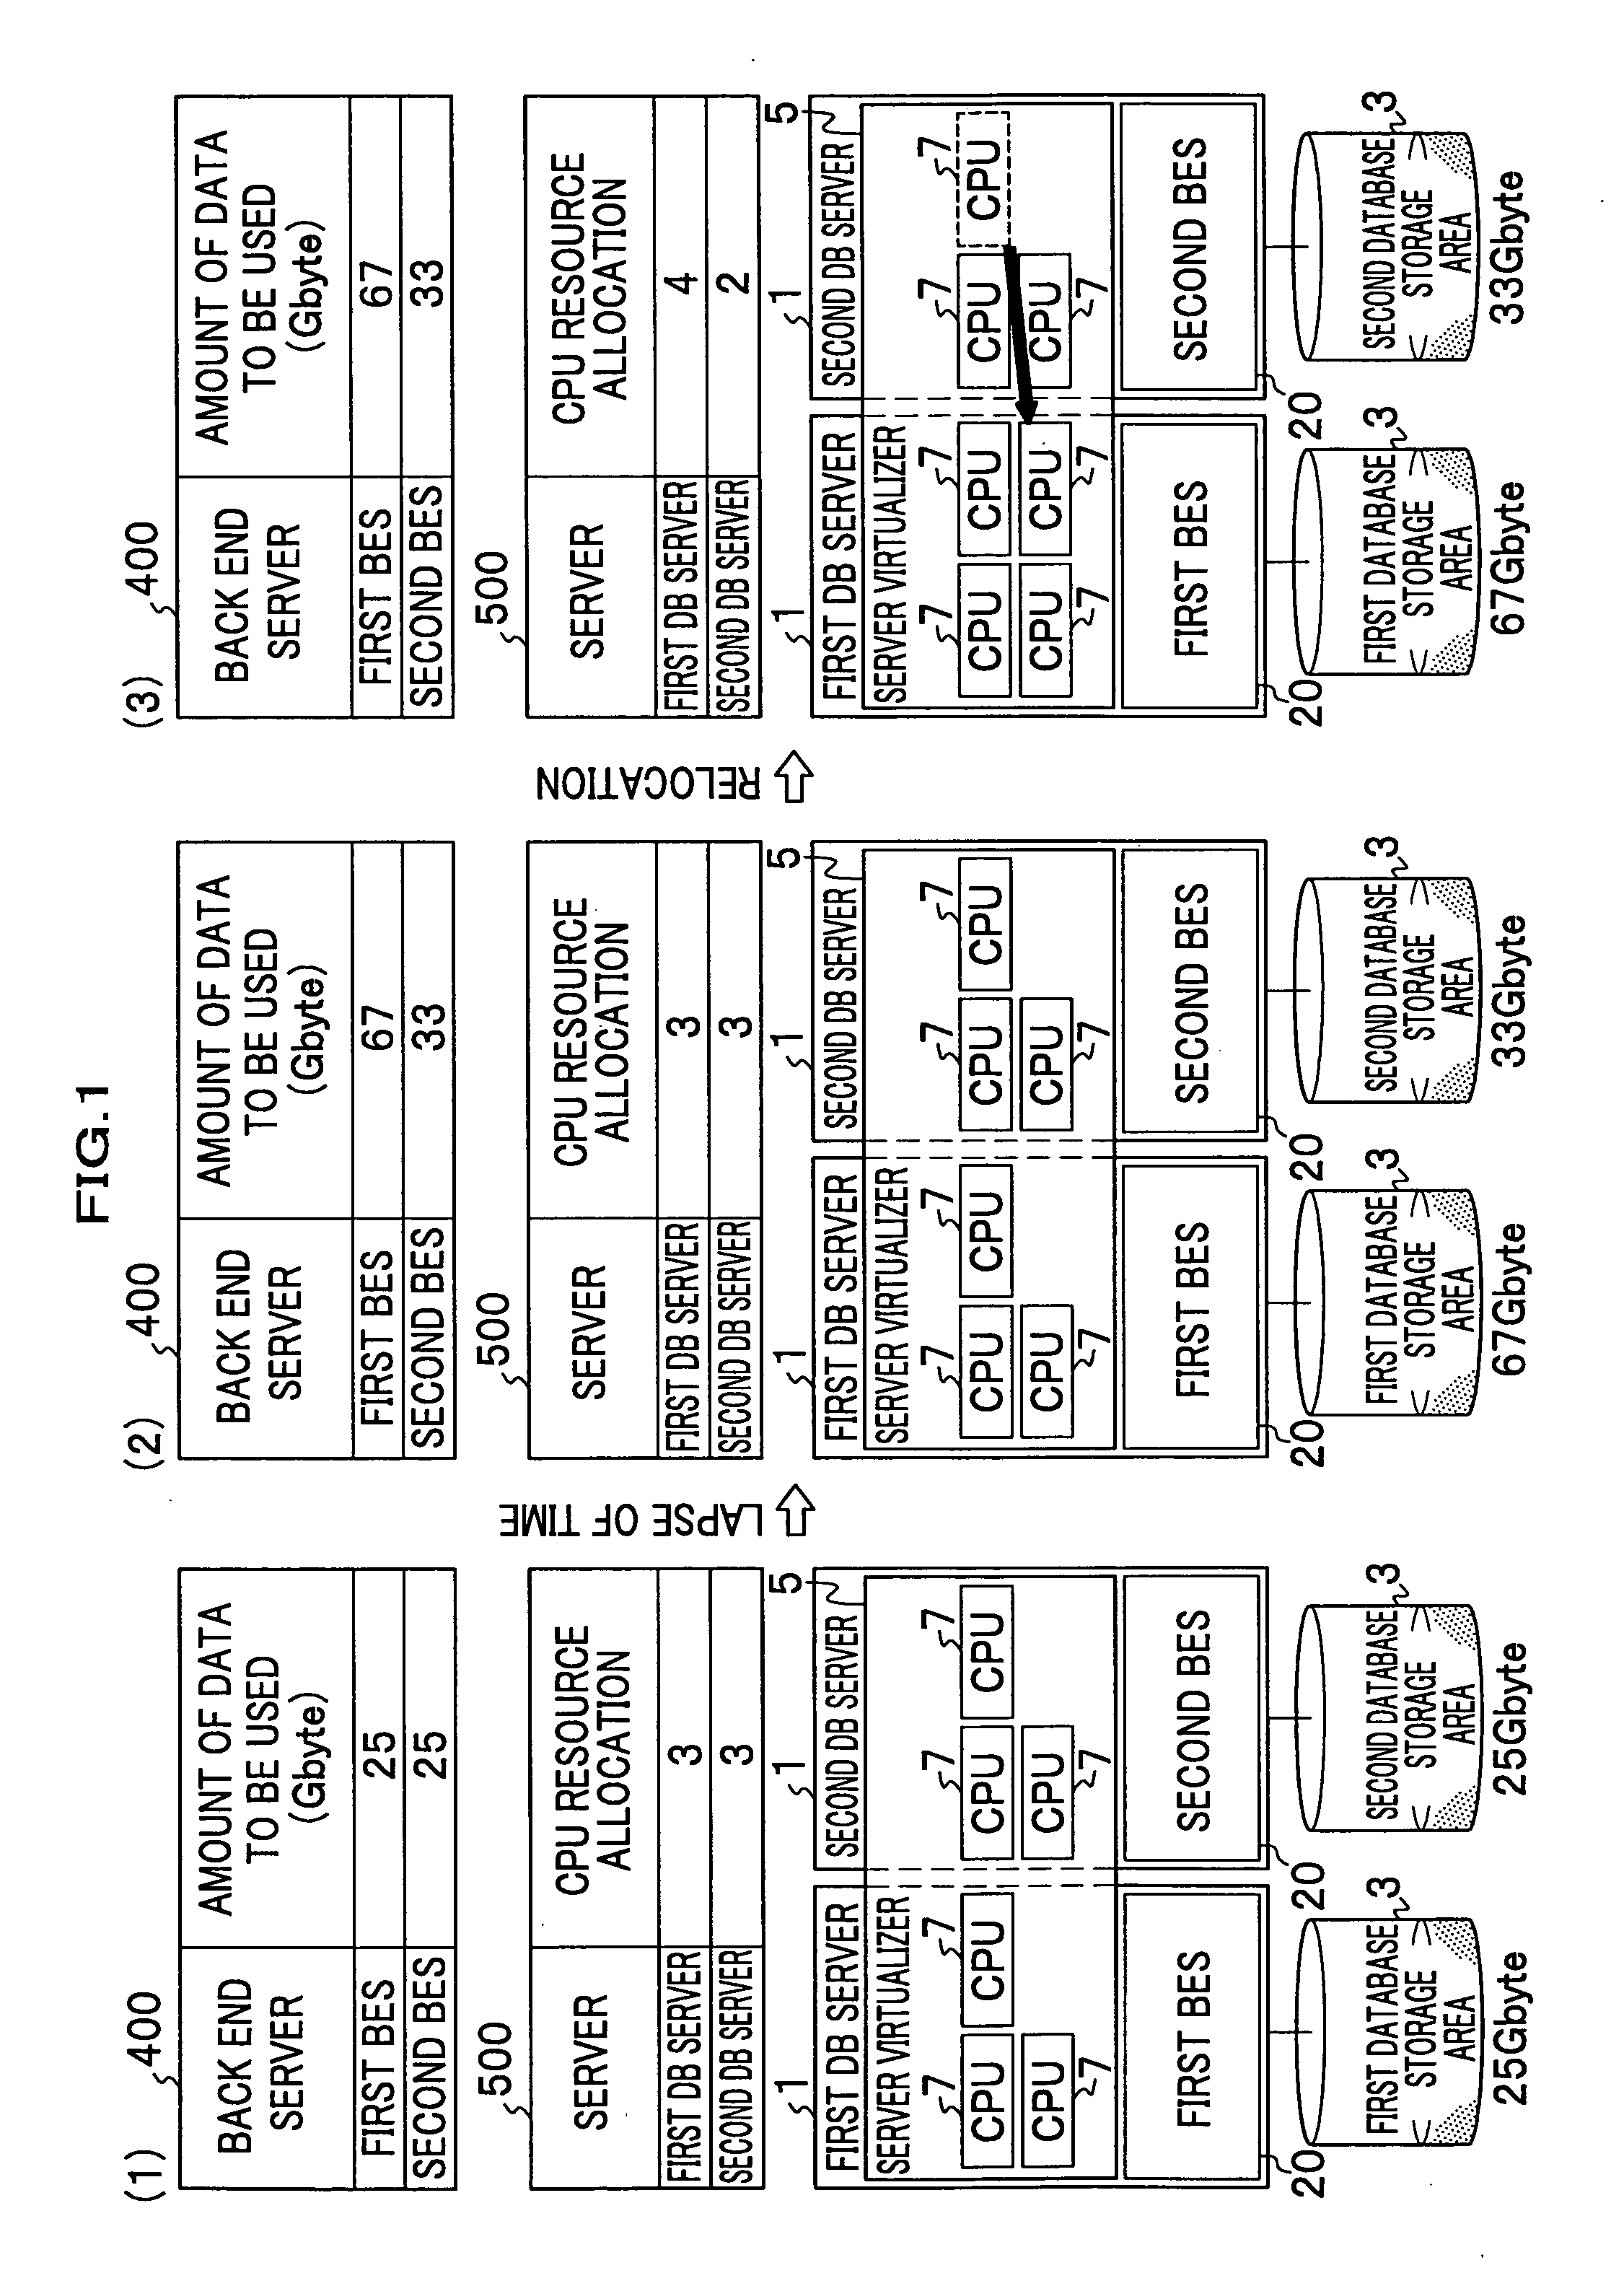 Method and system for managing load balancing in data-processing system